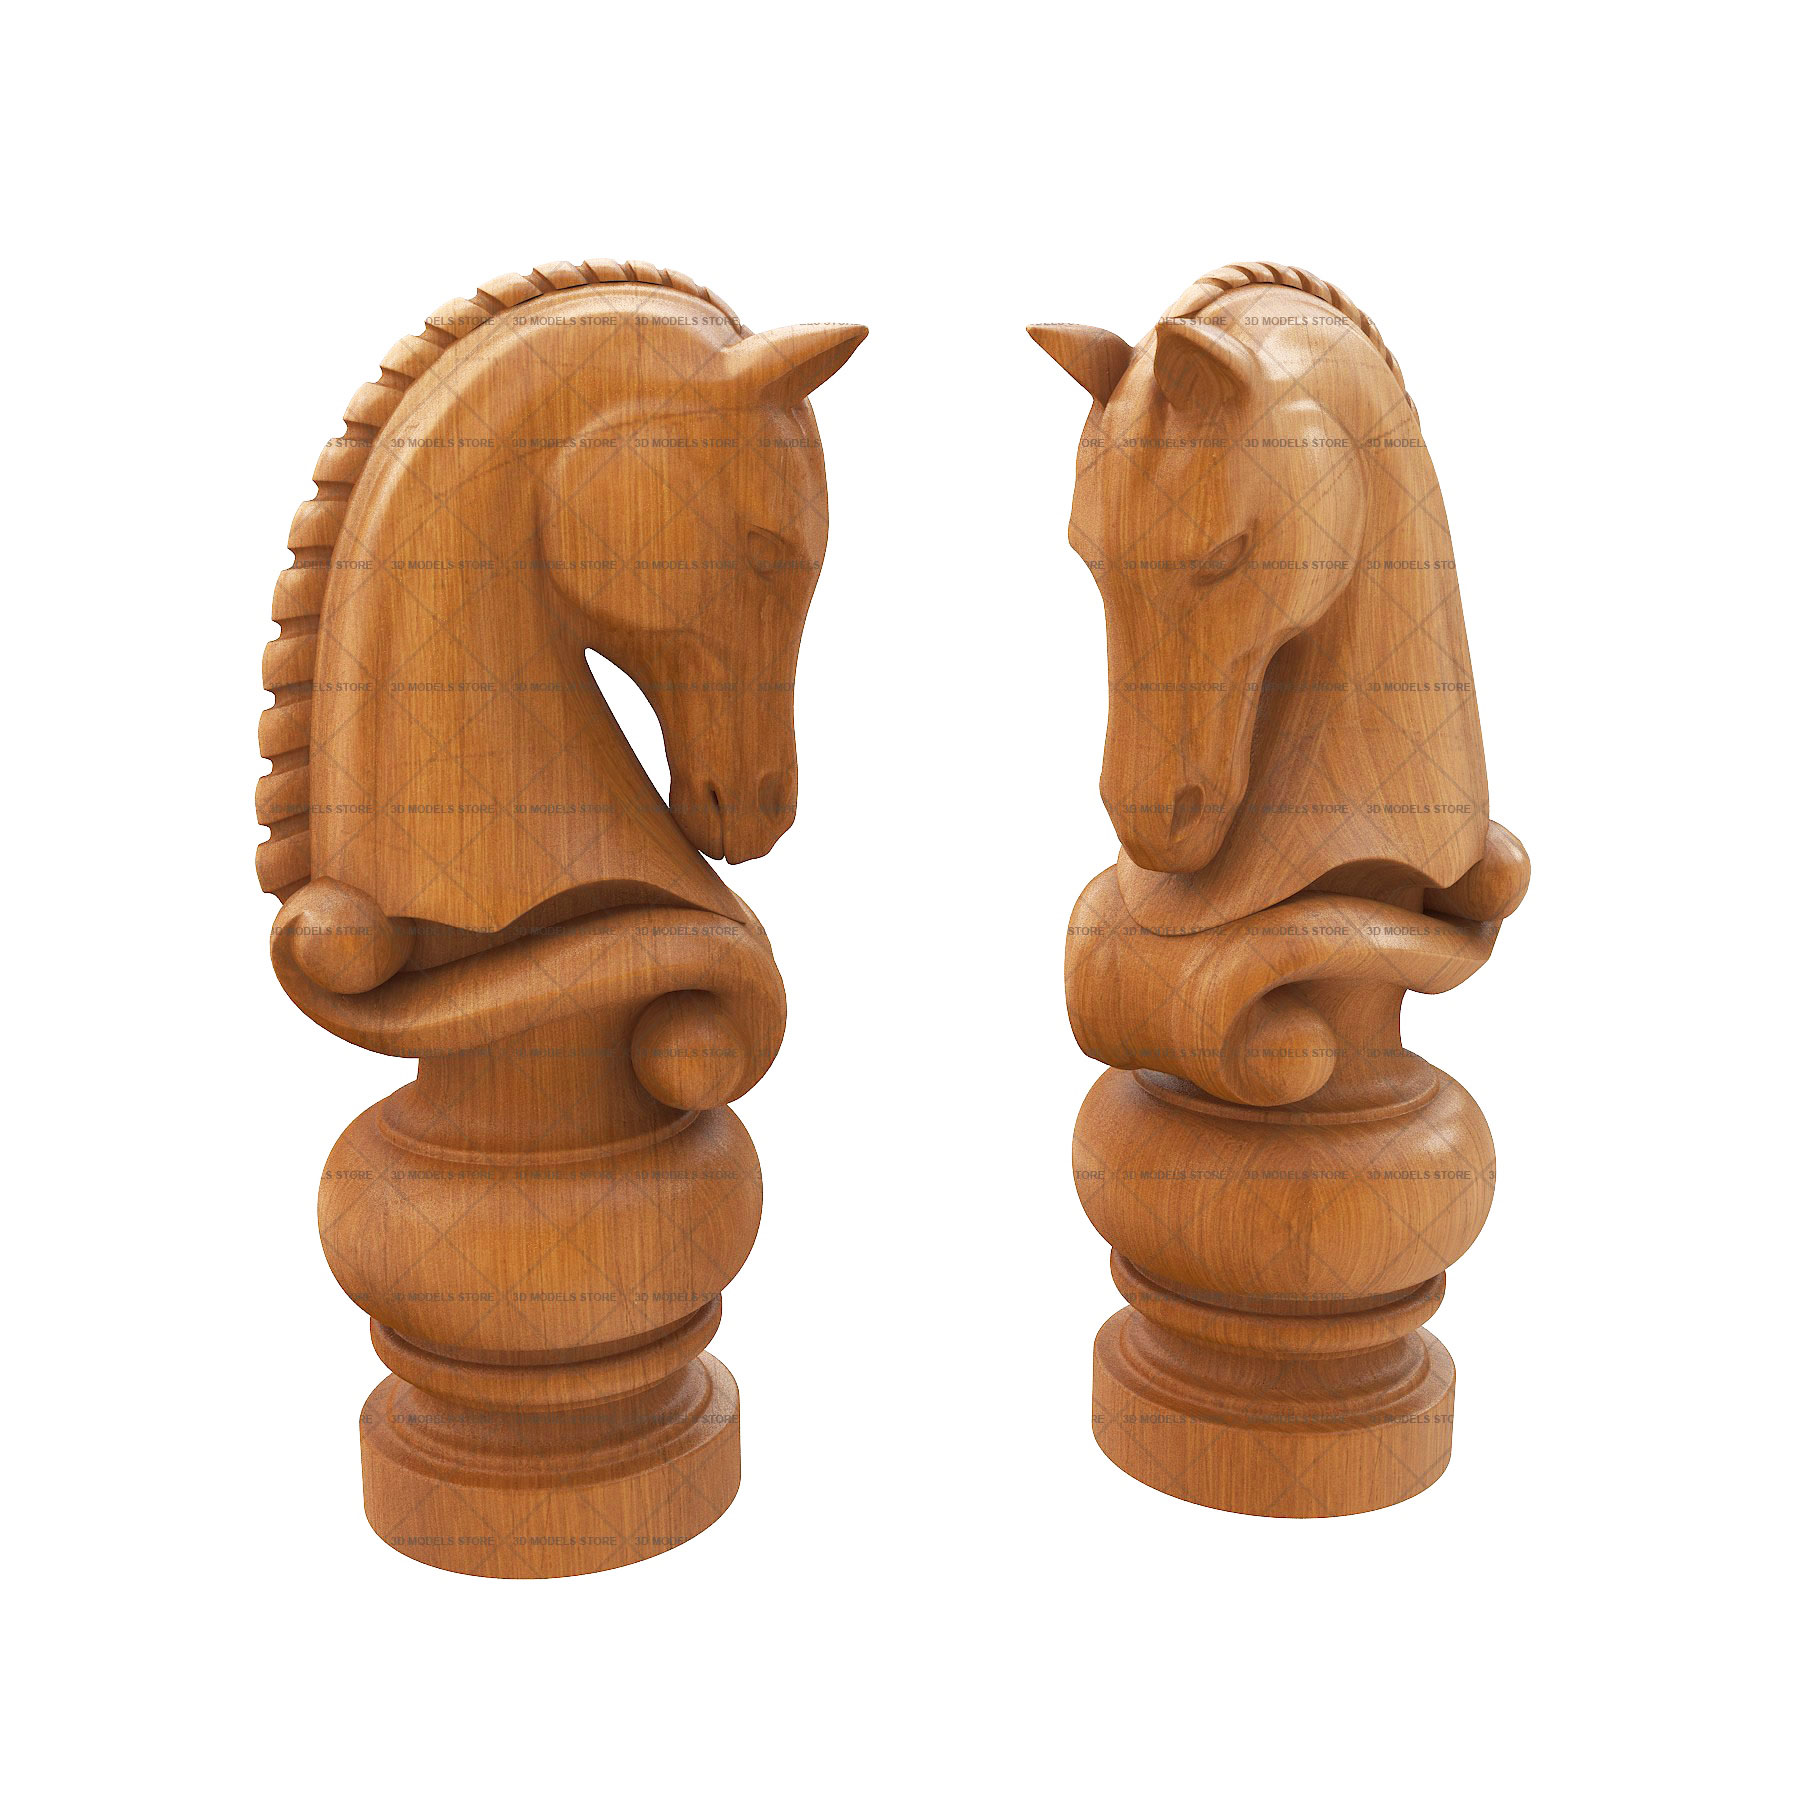 3D Printed Chess Set Pieces: A Complete How-to Guide For Custom Making Your  Own - J-CAD Inc. 1.888.202.2052